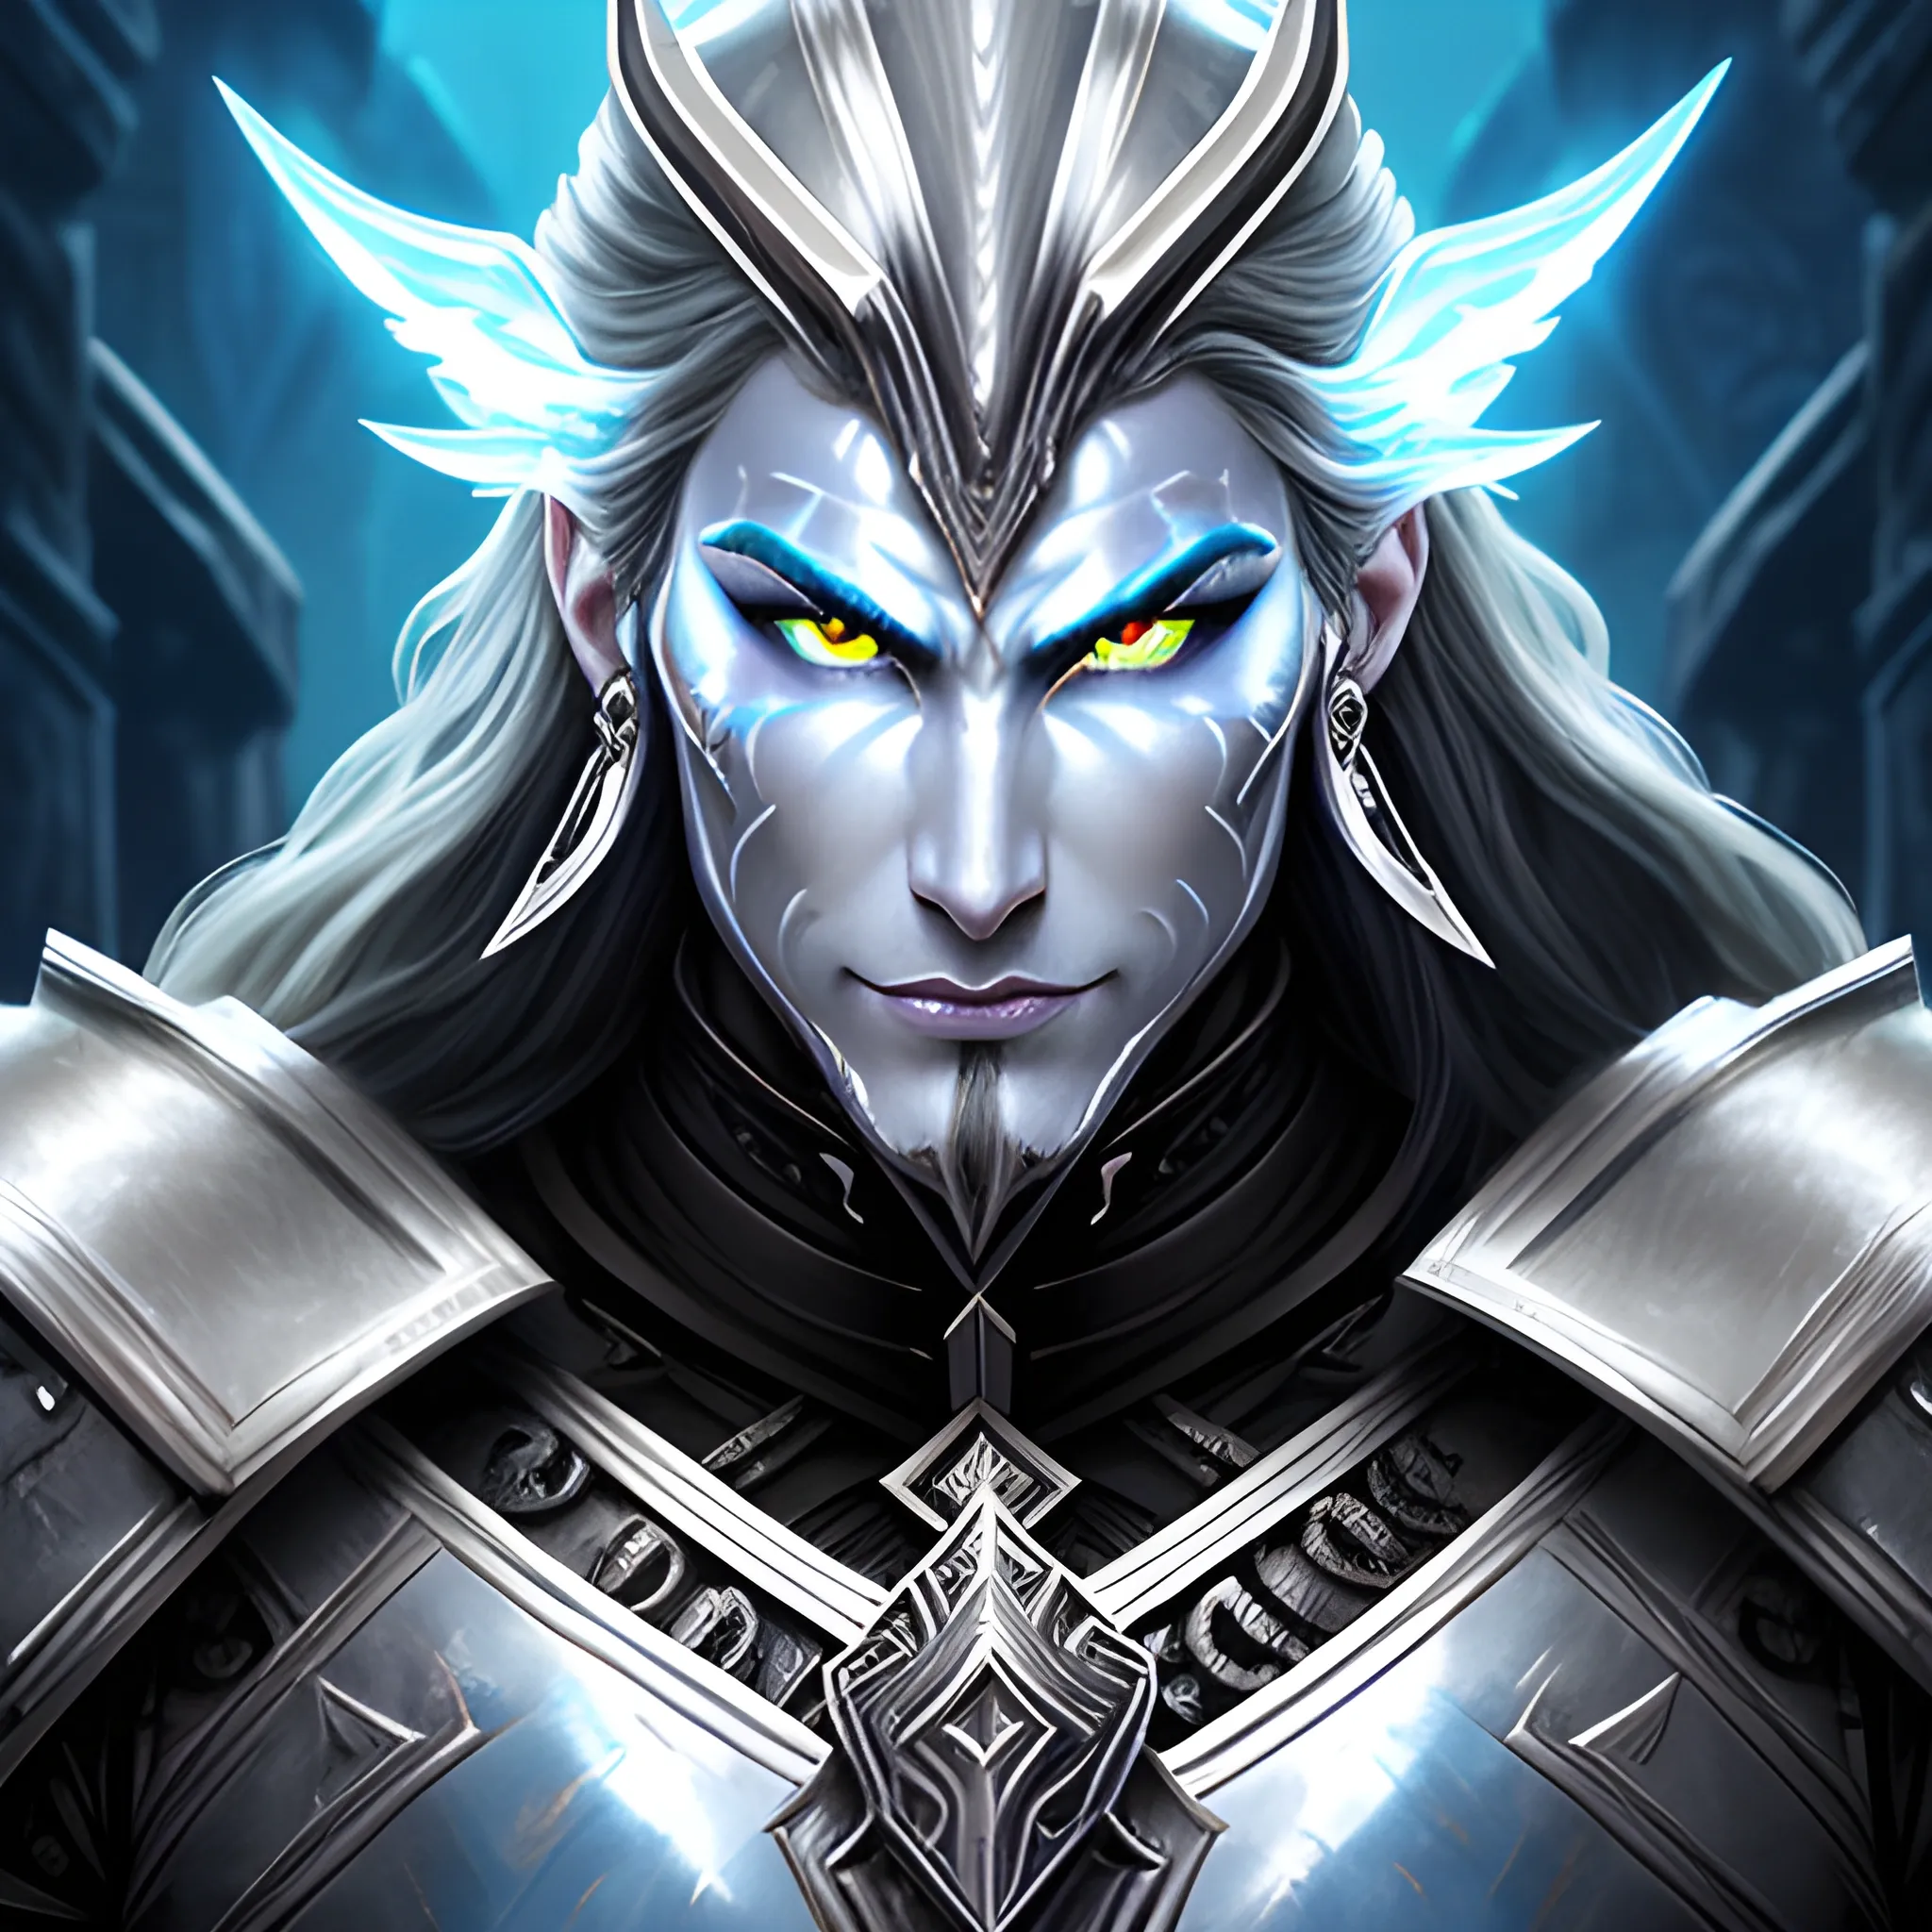 fantasy, paladin, warrior, metal skin, male, long black hair, icy eyes, blue eyes, intricate light silver armor, smiling, hyper realistic, dungeons and dragons, strong, armed, black hair, Oil Painting, filigree skin, silver skin, silver flame necklace, grey skin, iron skin, platinum skin, human ears, Oil Painting, young, handsome, thin tribal facial tattoos, steel eyes, face tattoo, face scarring, aluminium skin, friendly, no helmet, happy, confident